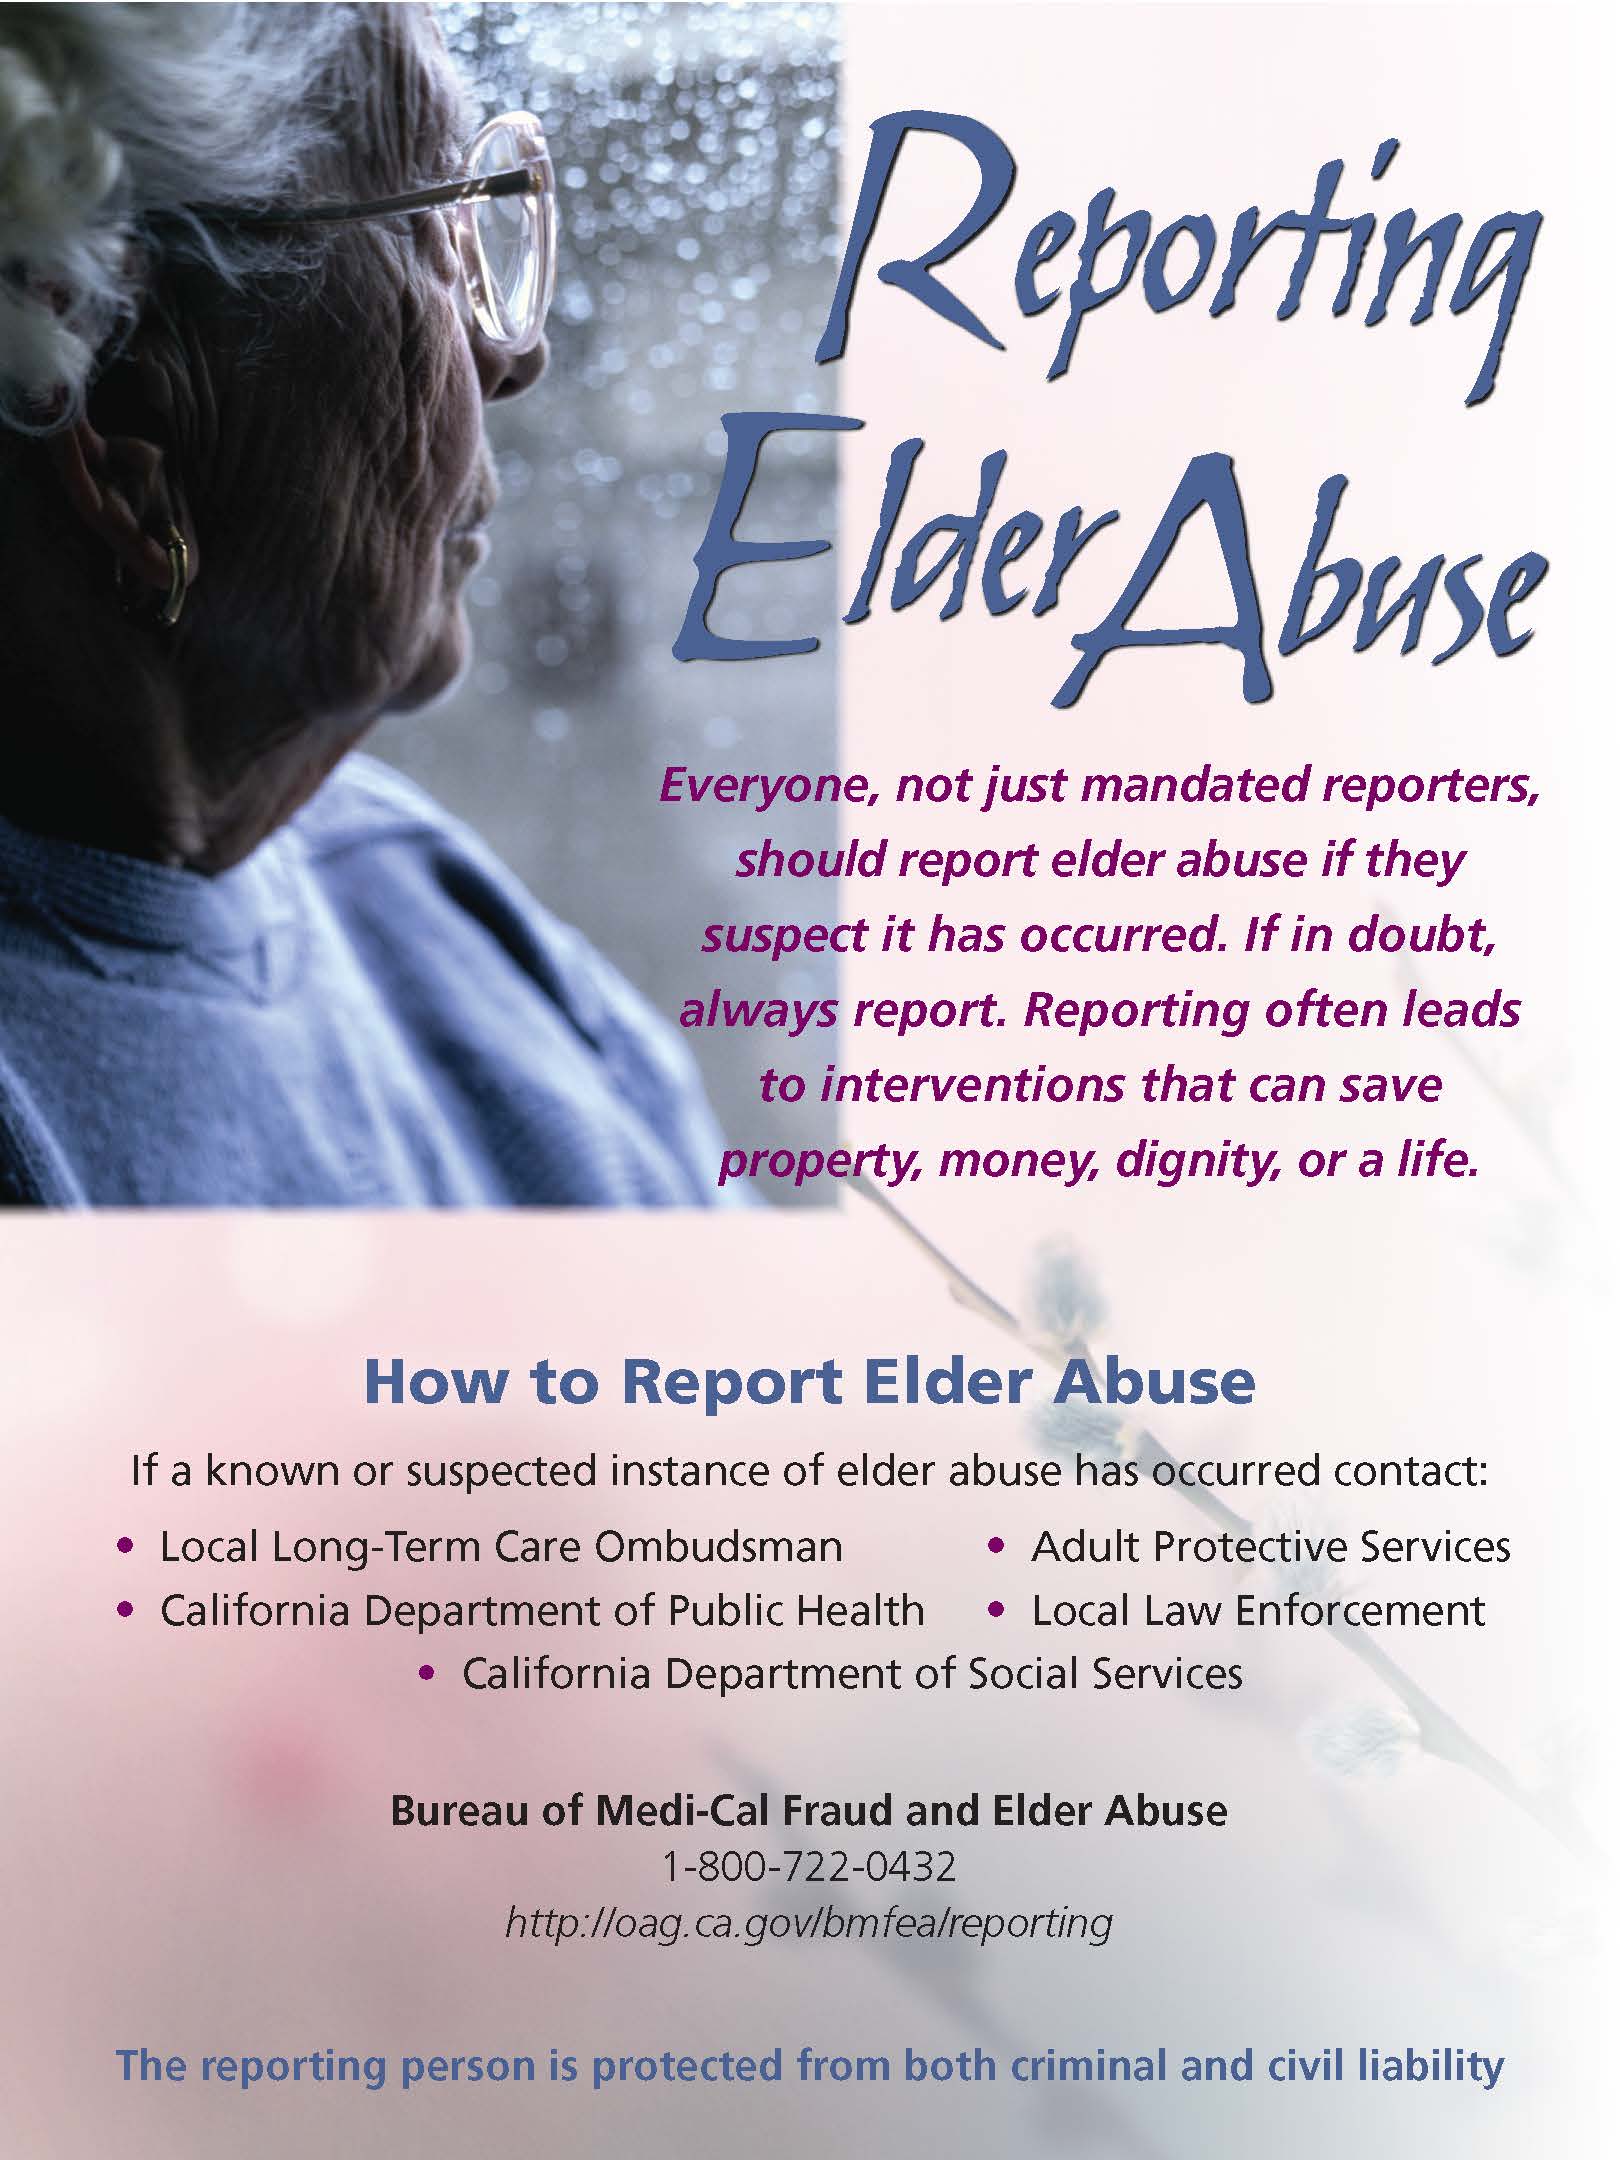 Elder Abuse - How to Report